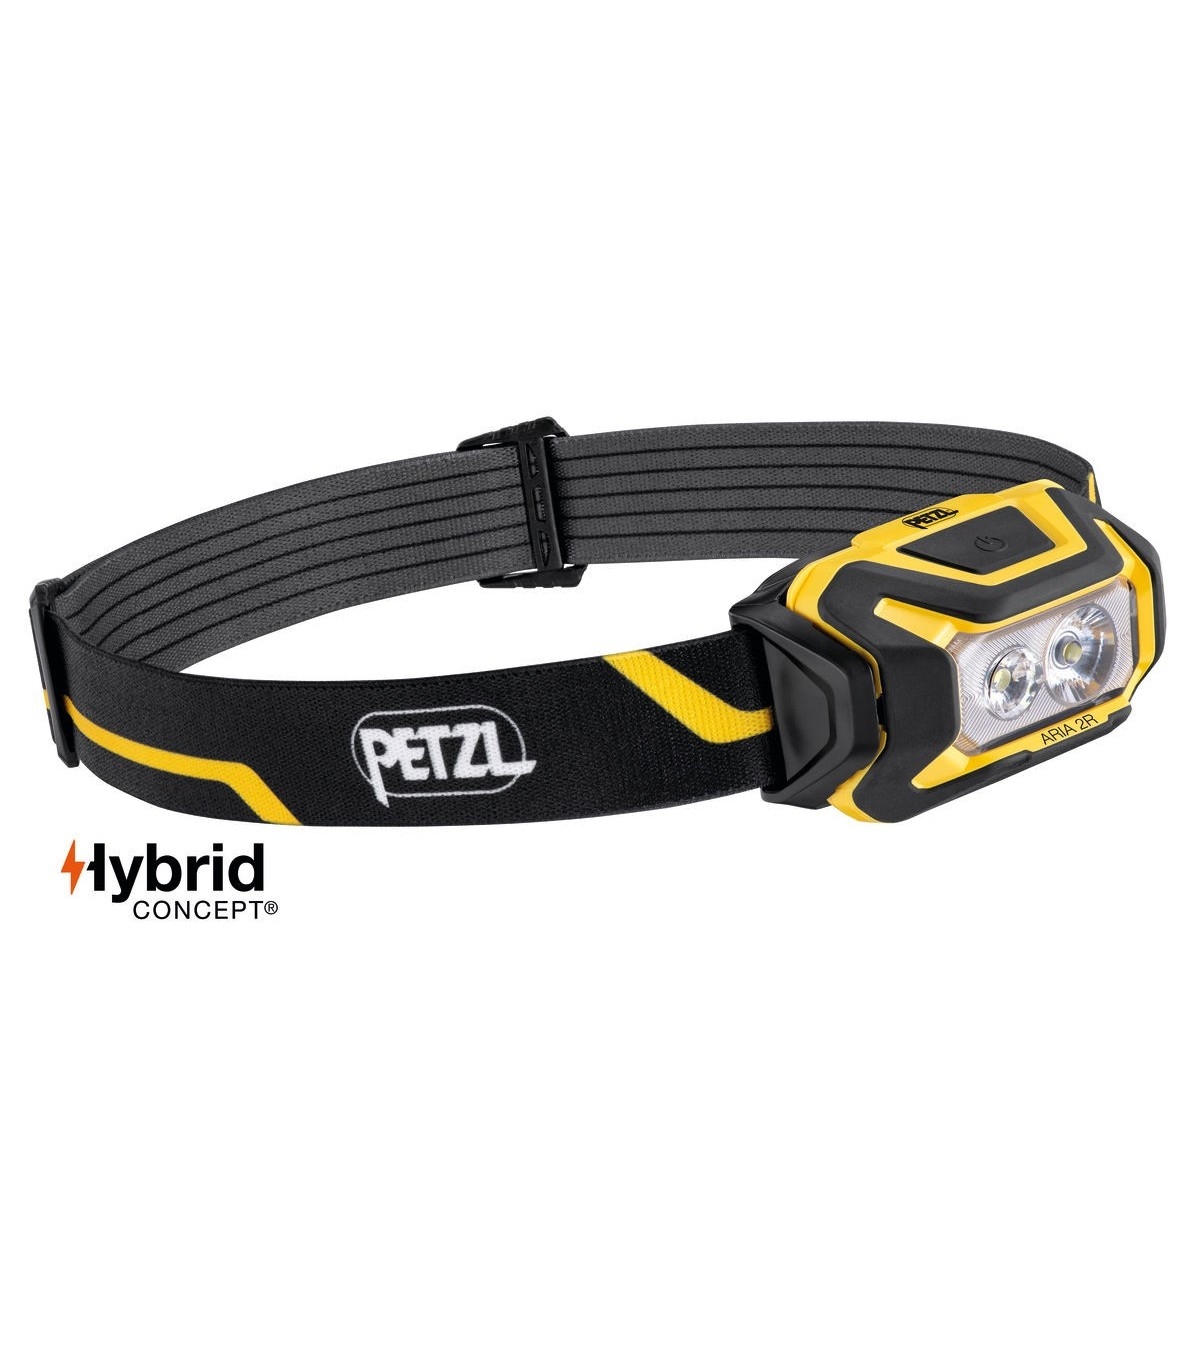 E78CHB 2 RS, Lampe frontale LED non rechargeable Petzl, 100 lm, AA